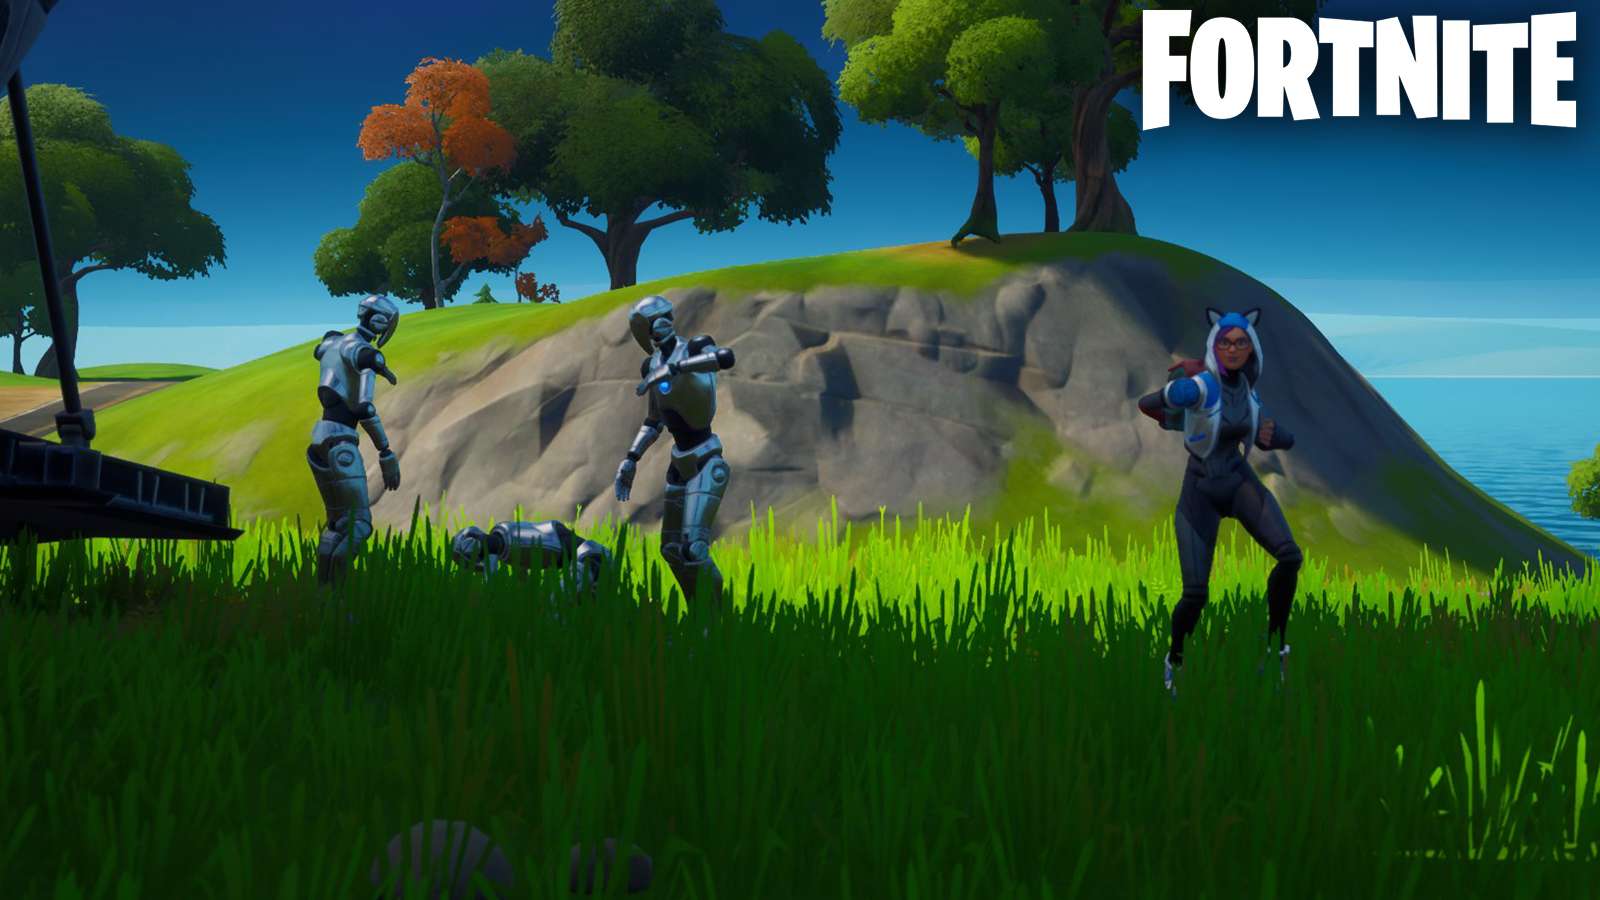 Fortnite character dancing with robots.